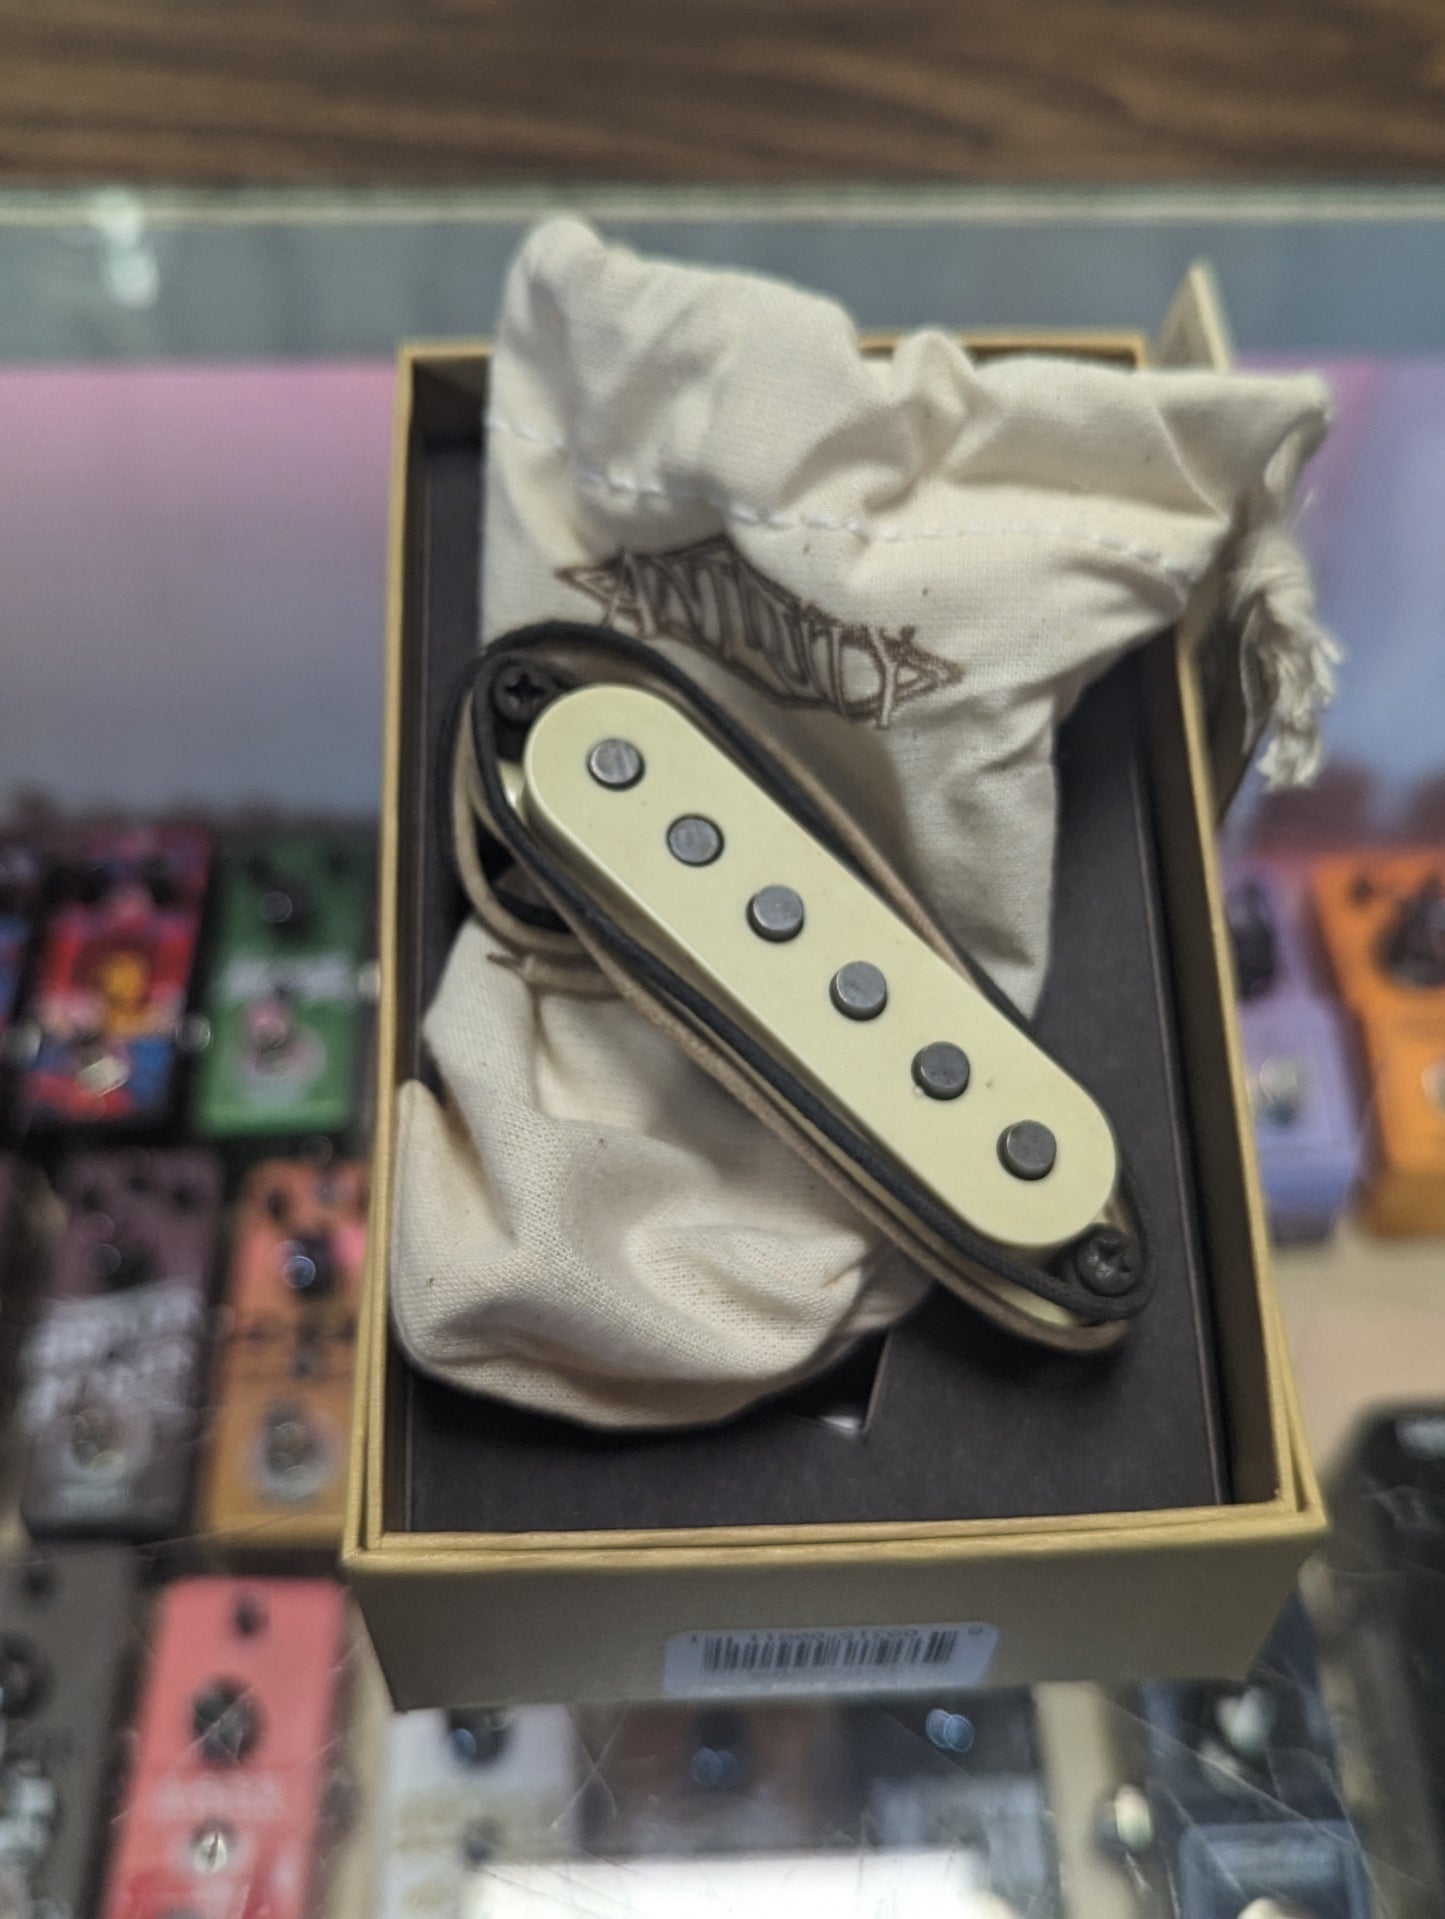 Seymour Duncan Antiquity II Surfer Strat Neck Pickup - Aged White (Used)